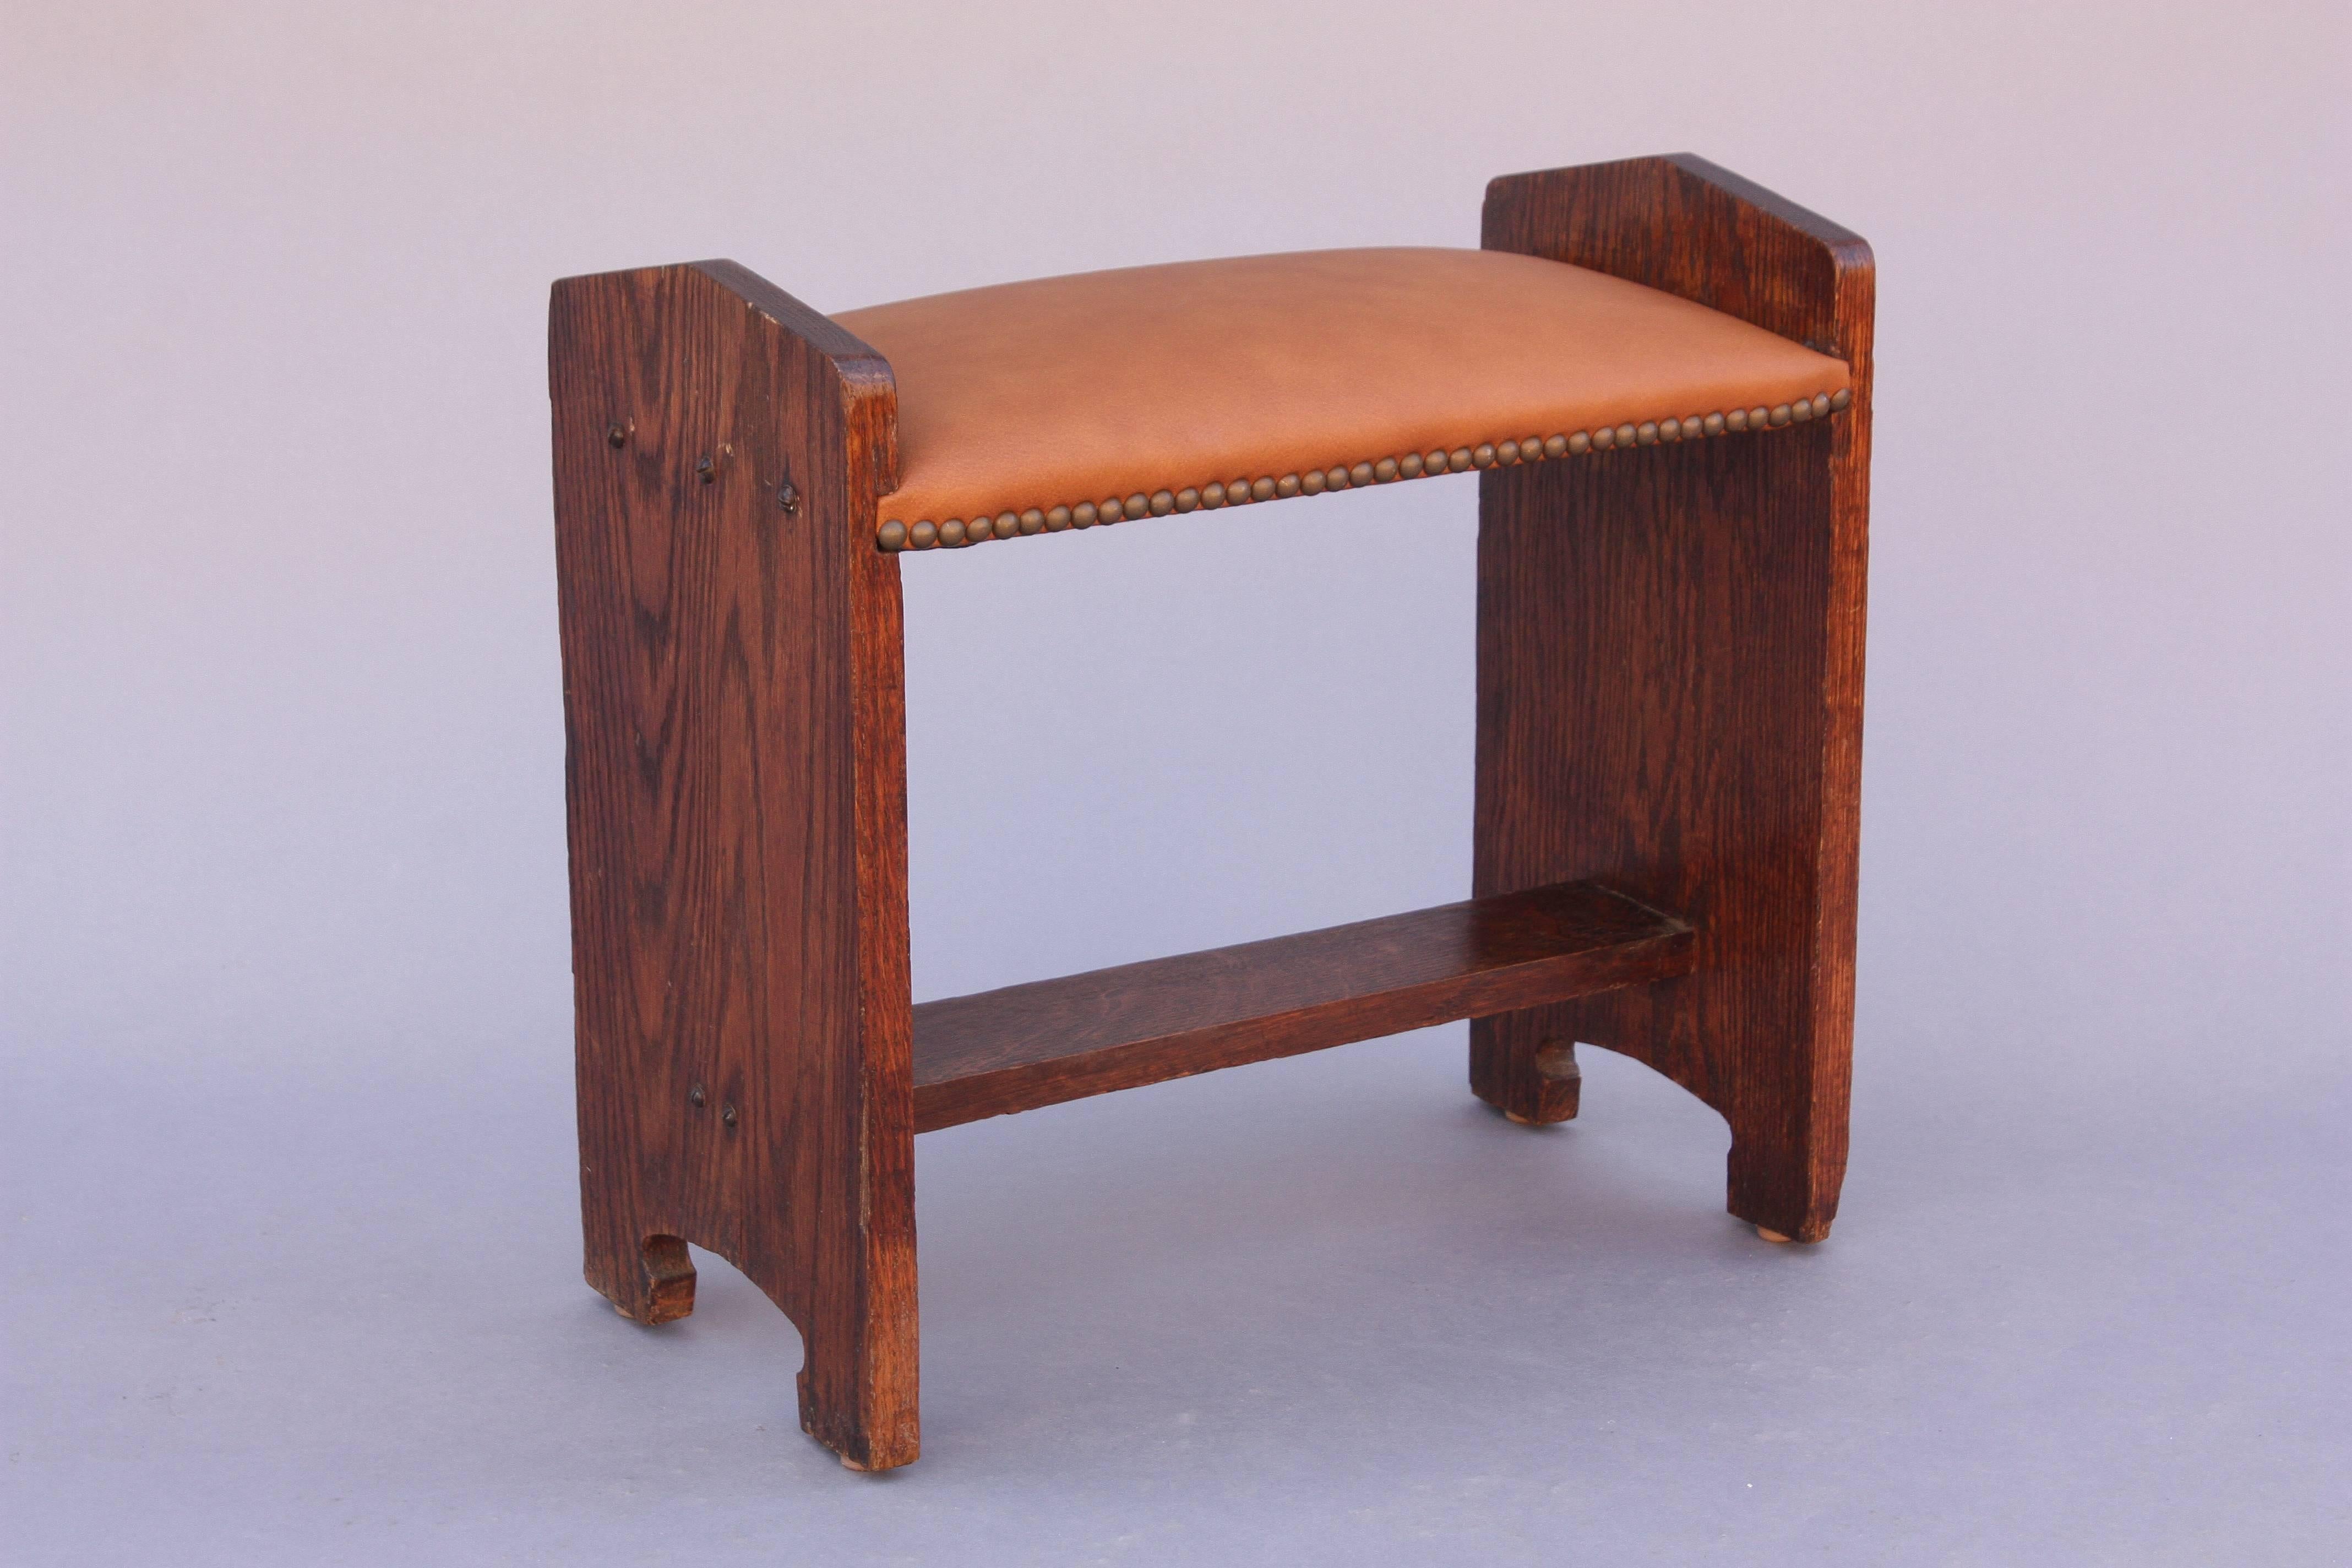 Oak foot stool with new leather upholstery, circa 1910.